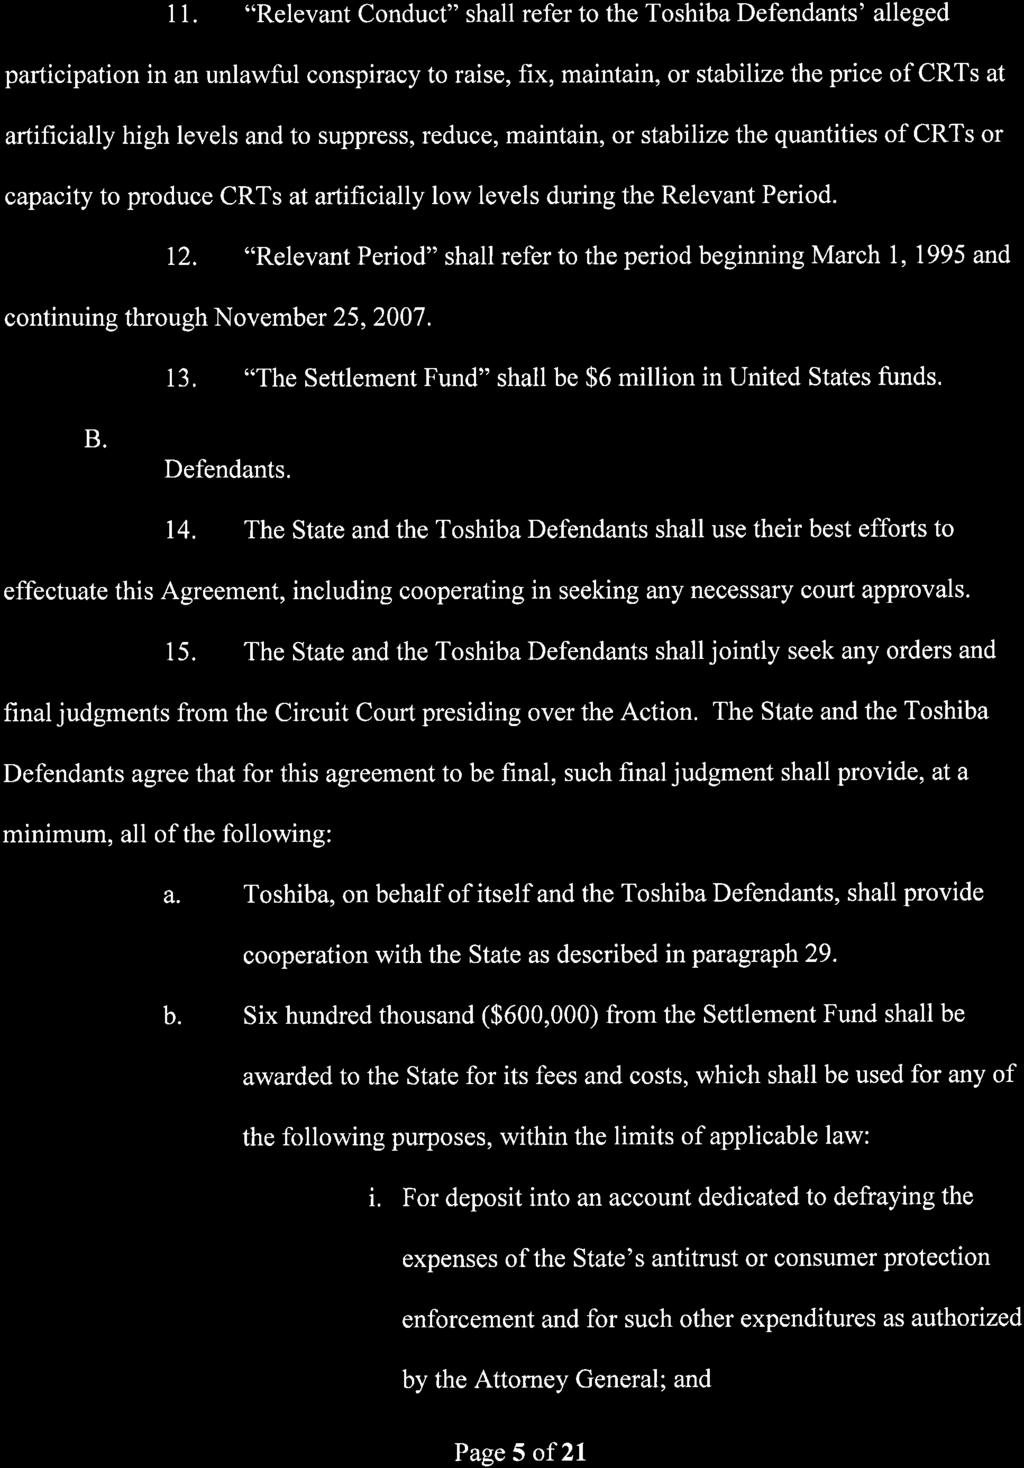 11. "Relevant Conduct" shall refer to the Toshiba Defendants' alleged participation in an unlawful conspiracy to raise, fix, maintain, or stabilize the price of CRTs at artificially high levels and